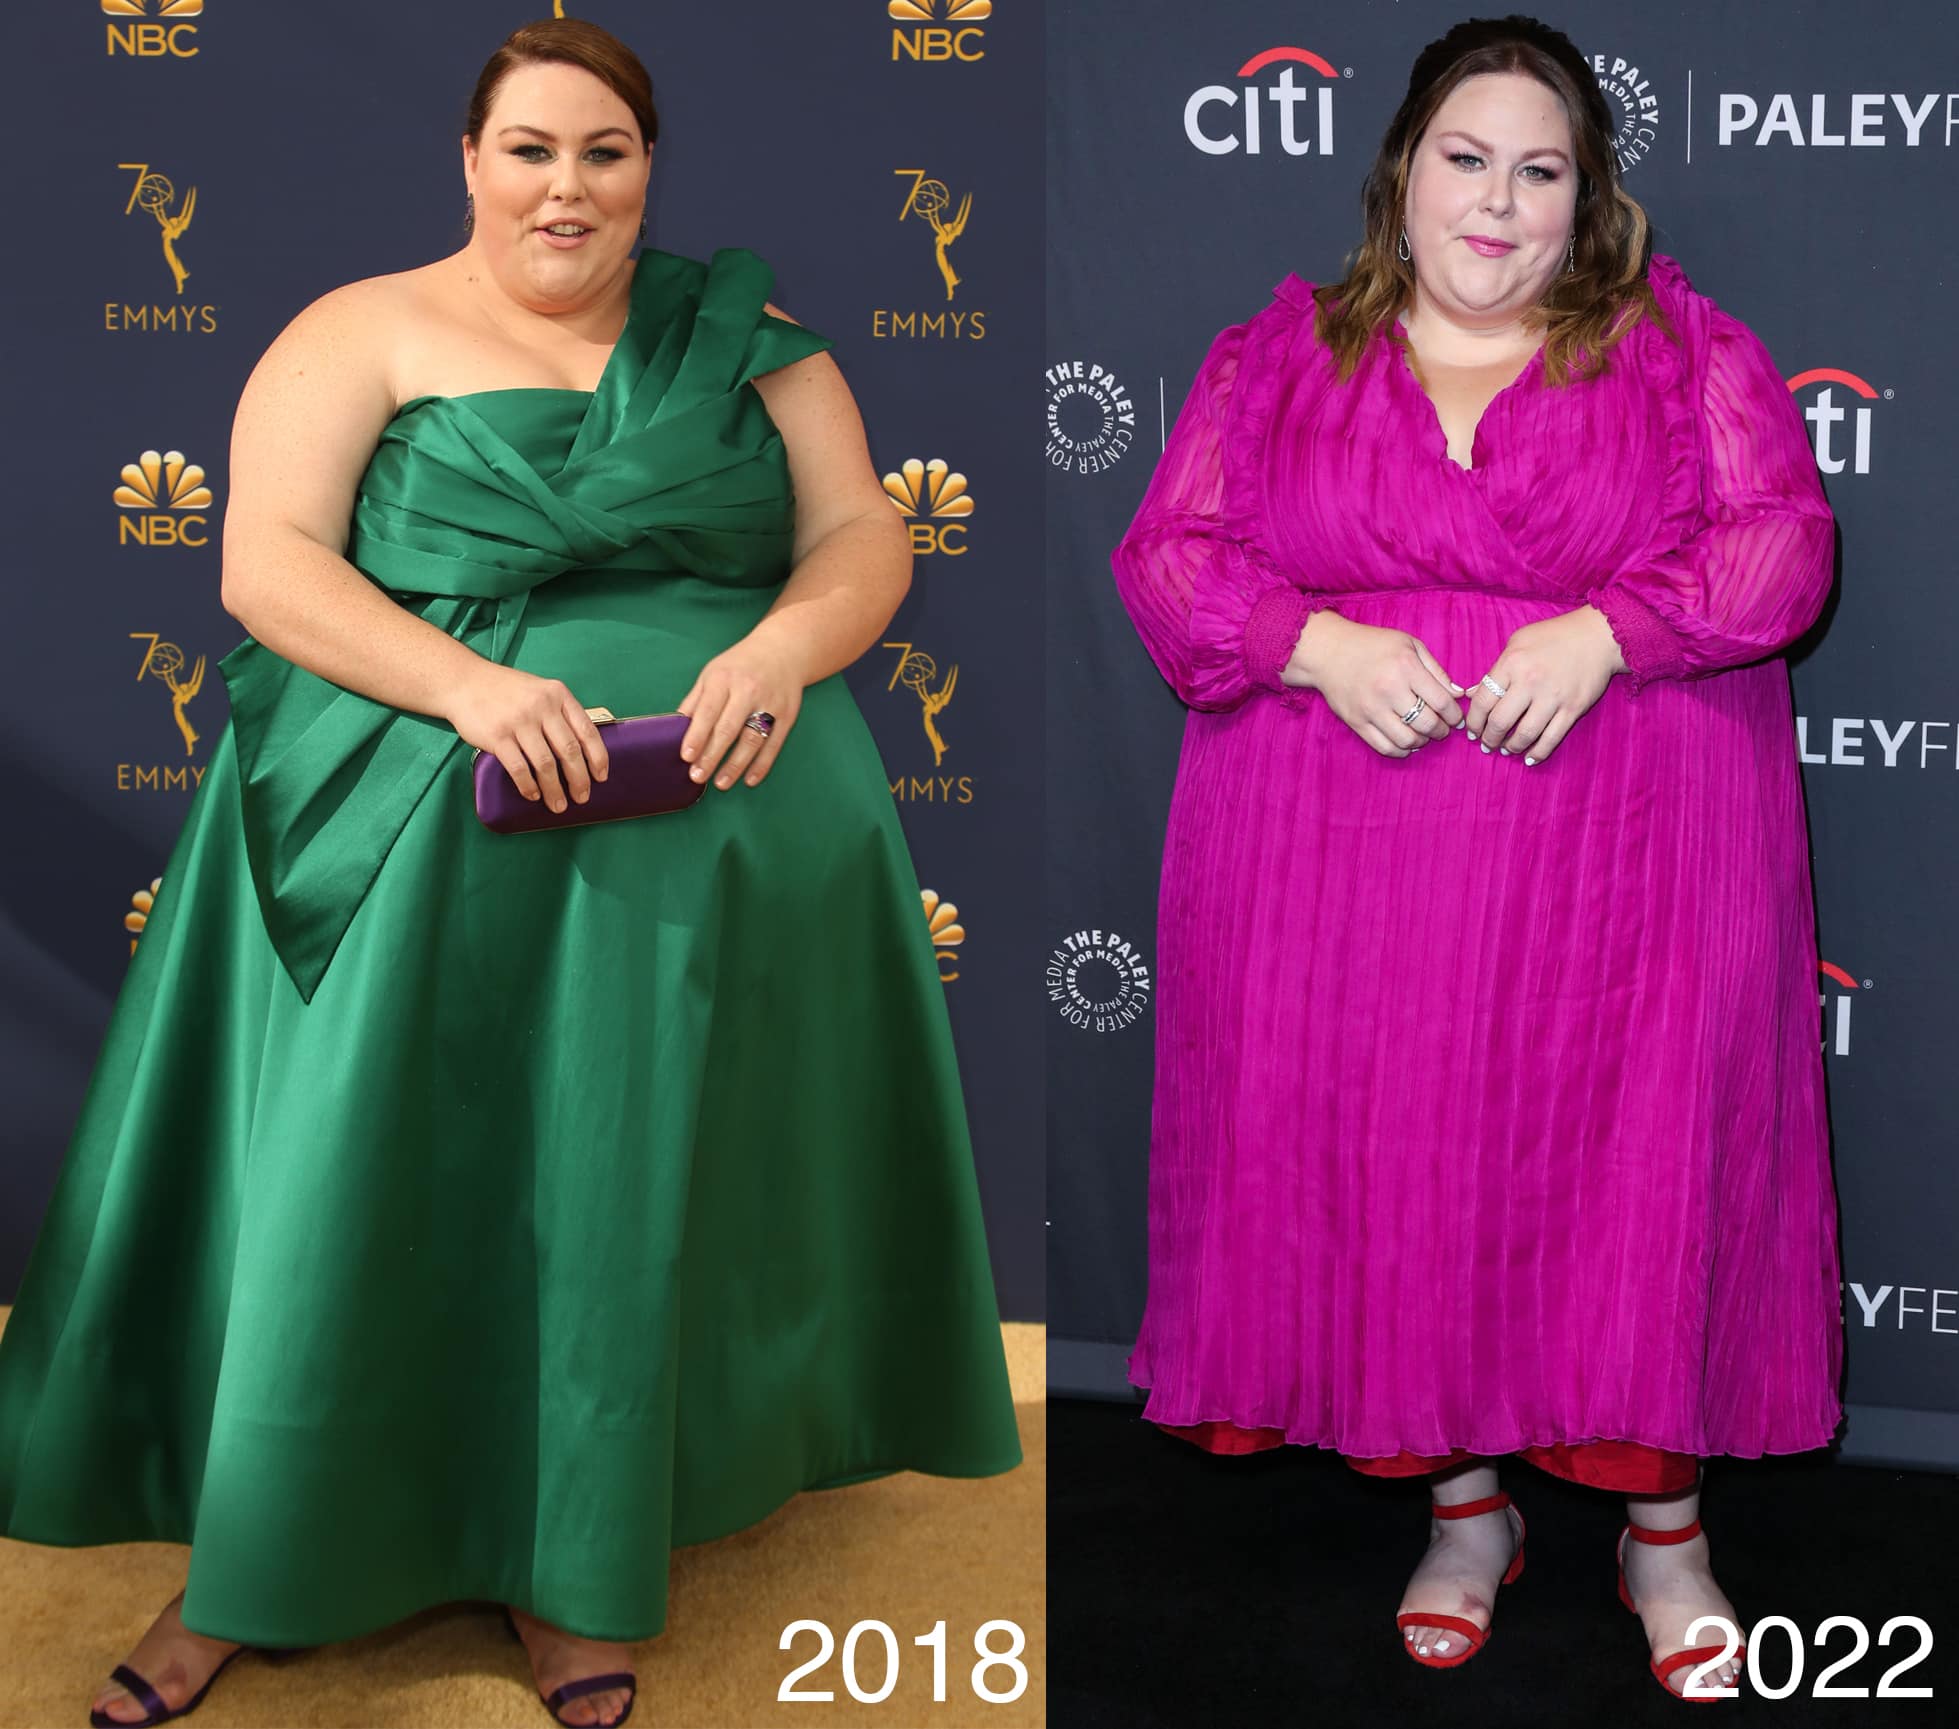 Chrissy Metz eats no more than 2,000 calories per day and works out five days a week